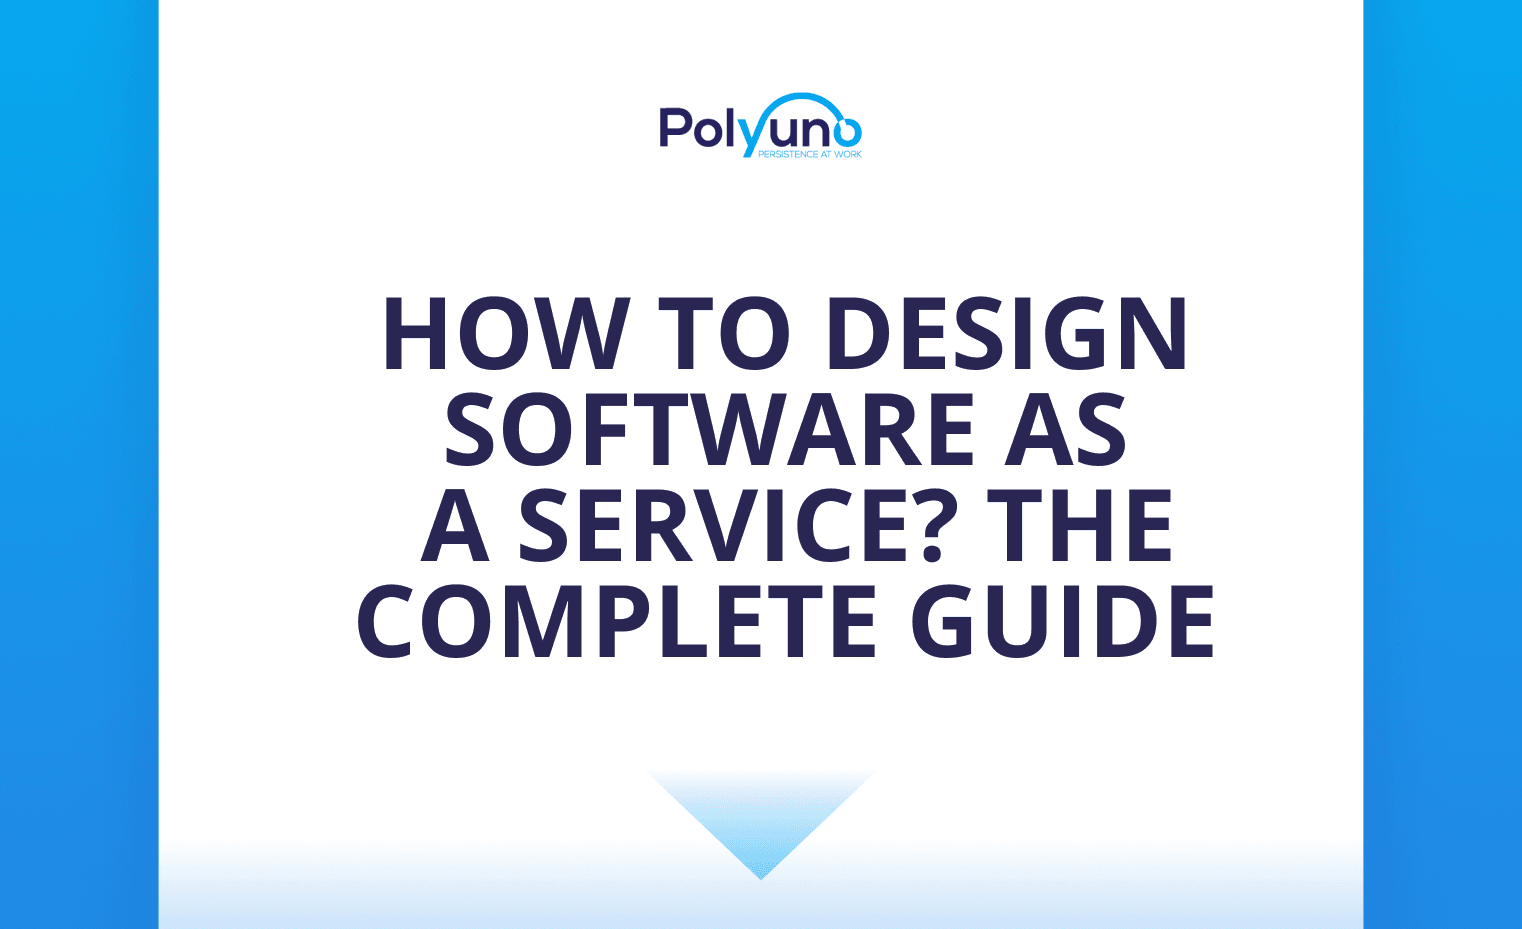 How To Design Software As A Service? The Complete Guide